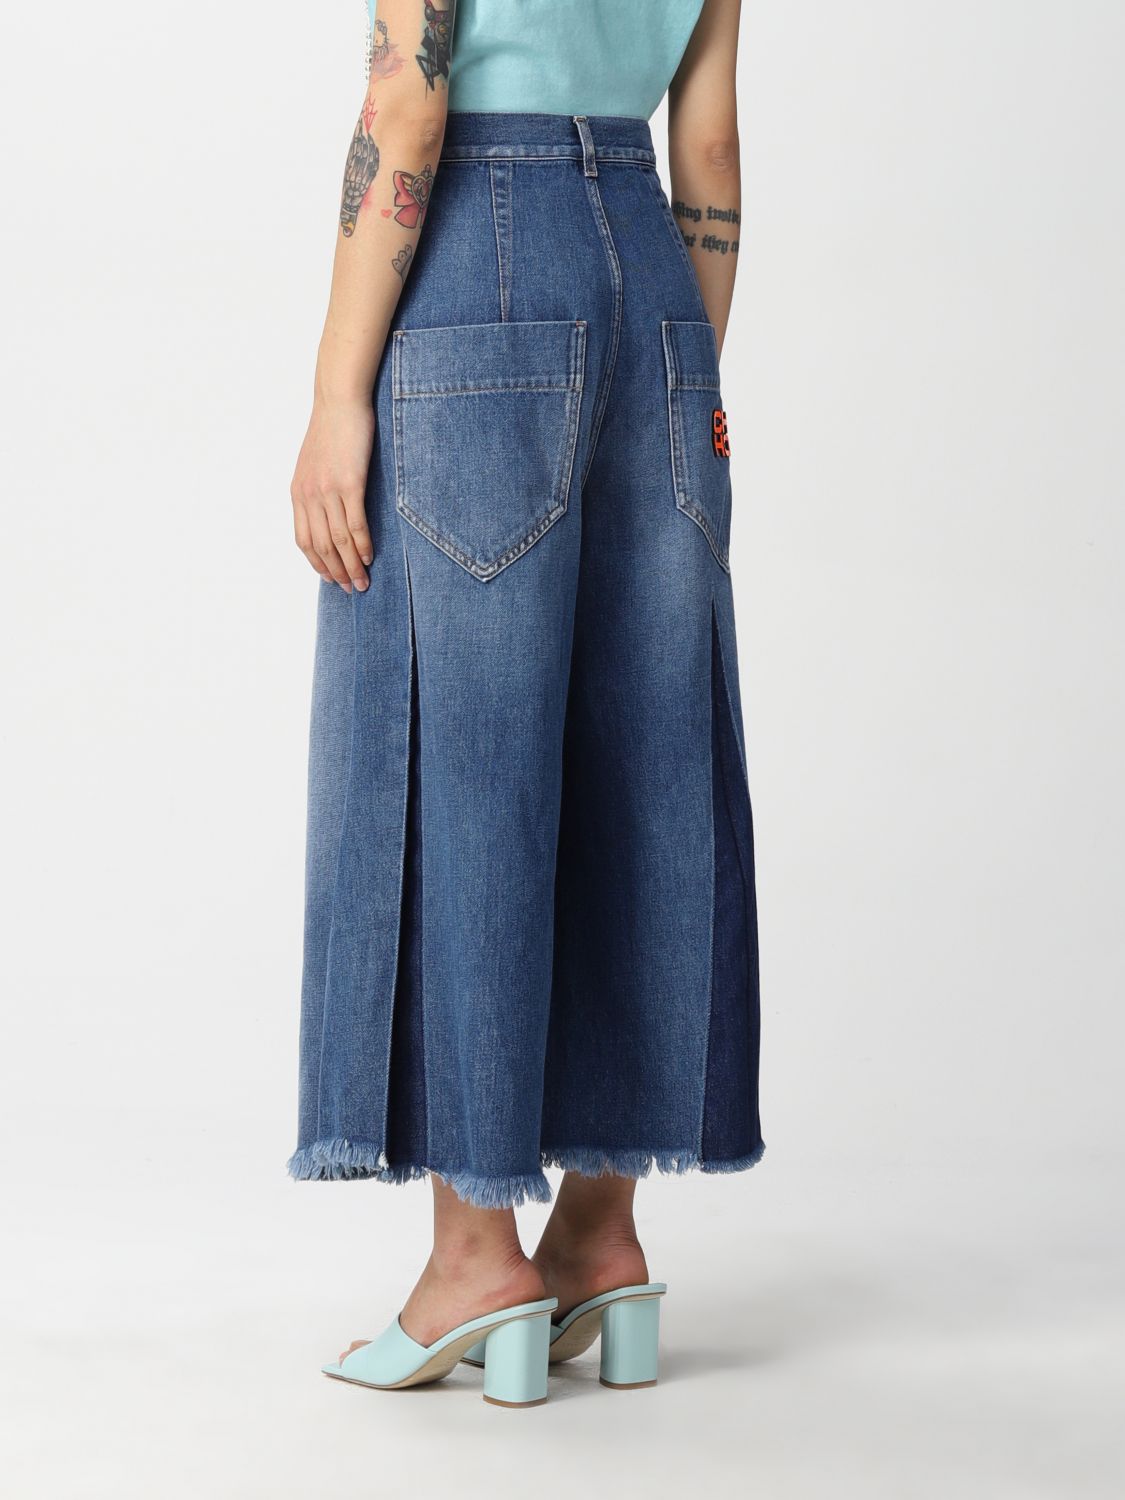 Jeans Circus Hotel: Jeans cropped Circus Hotel in denim washed denim 2